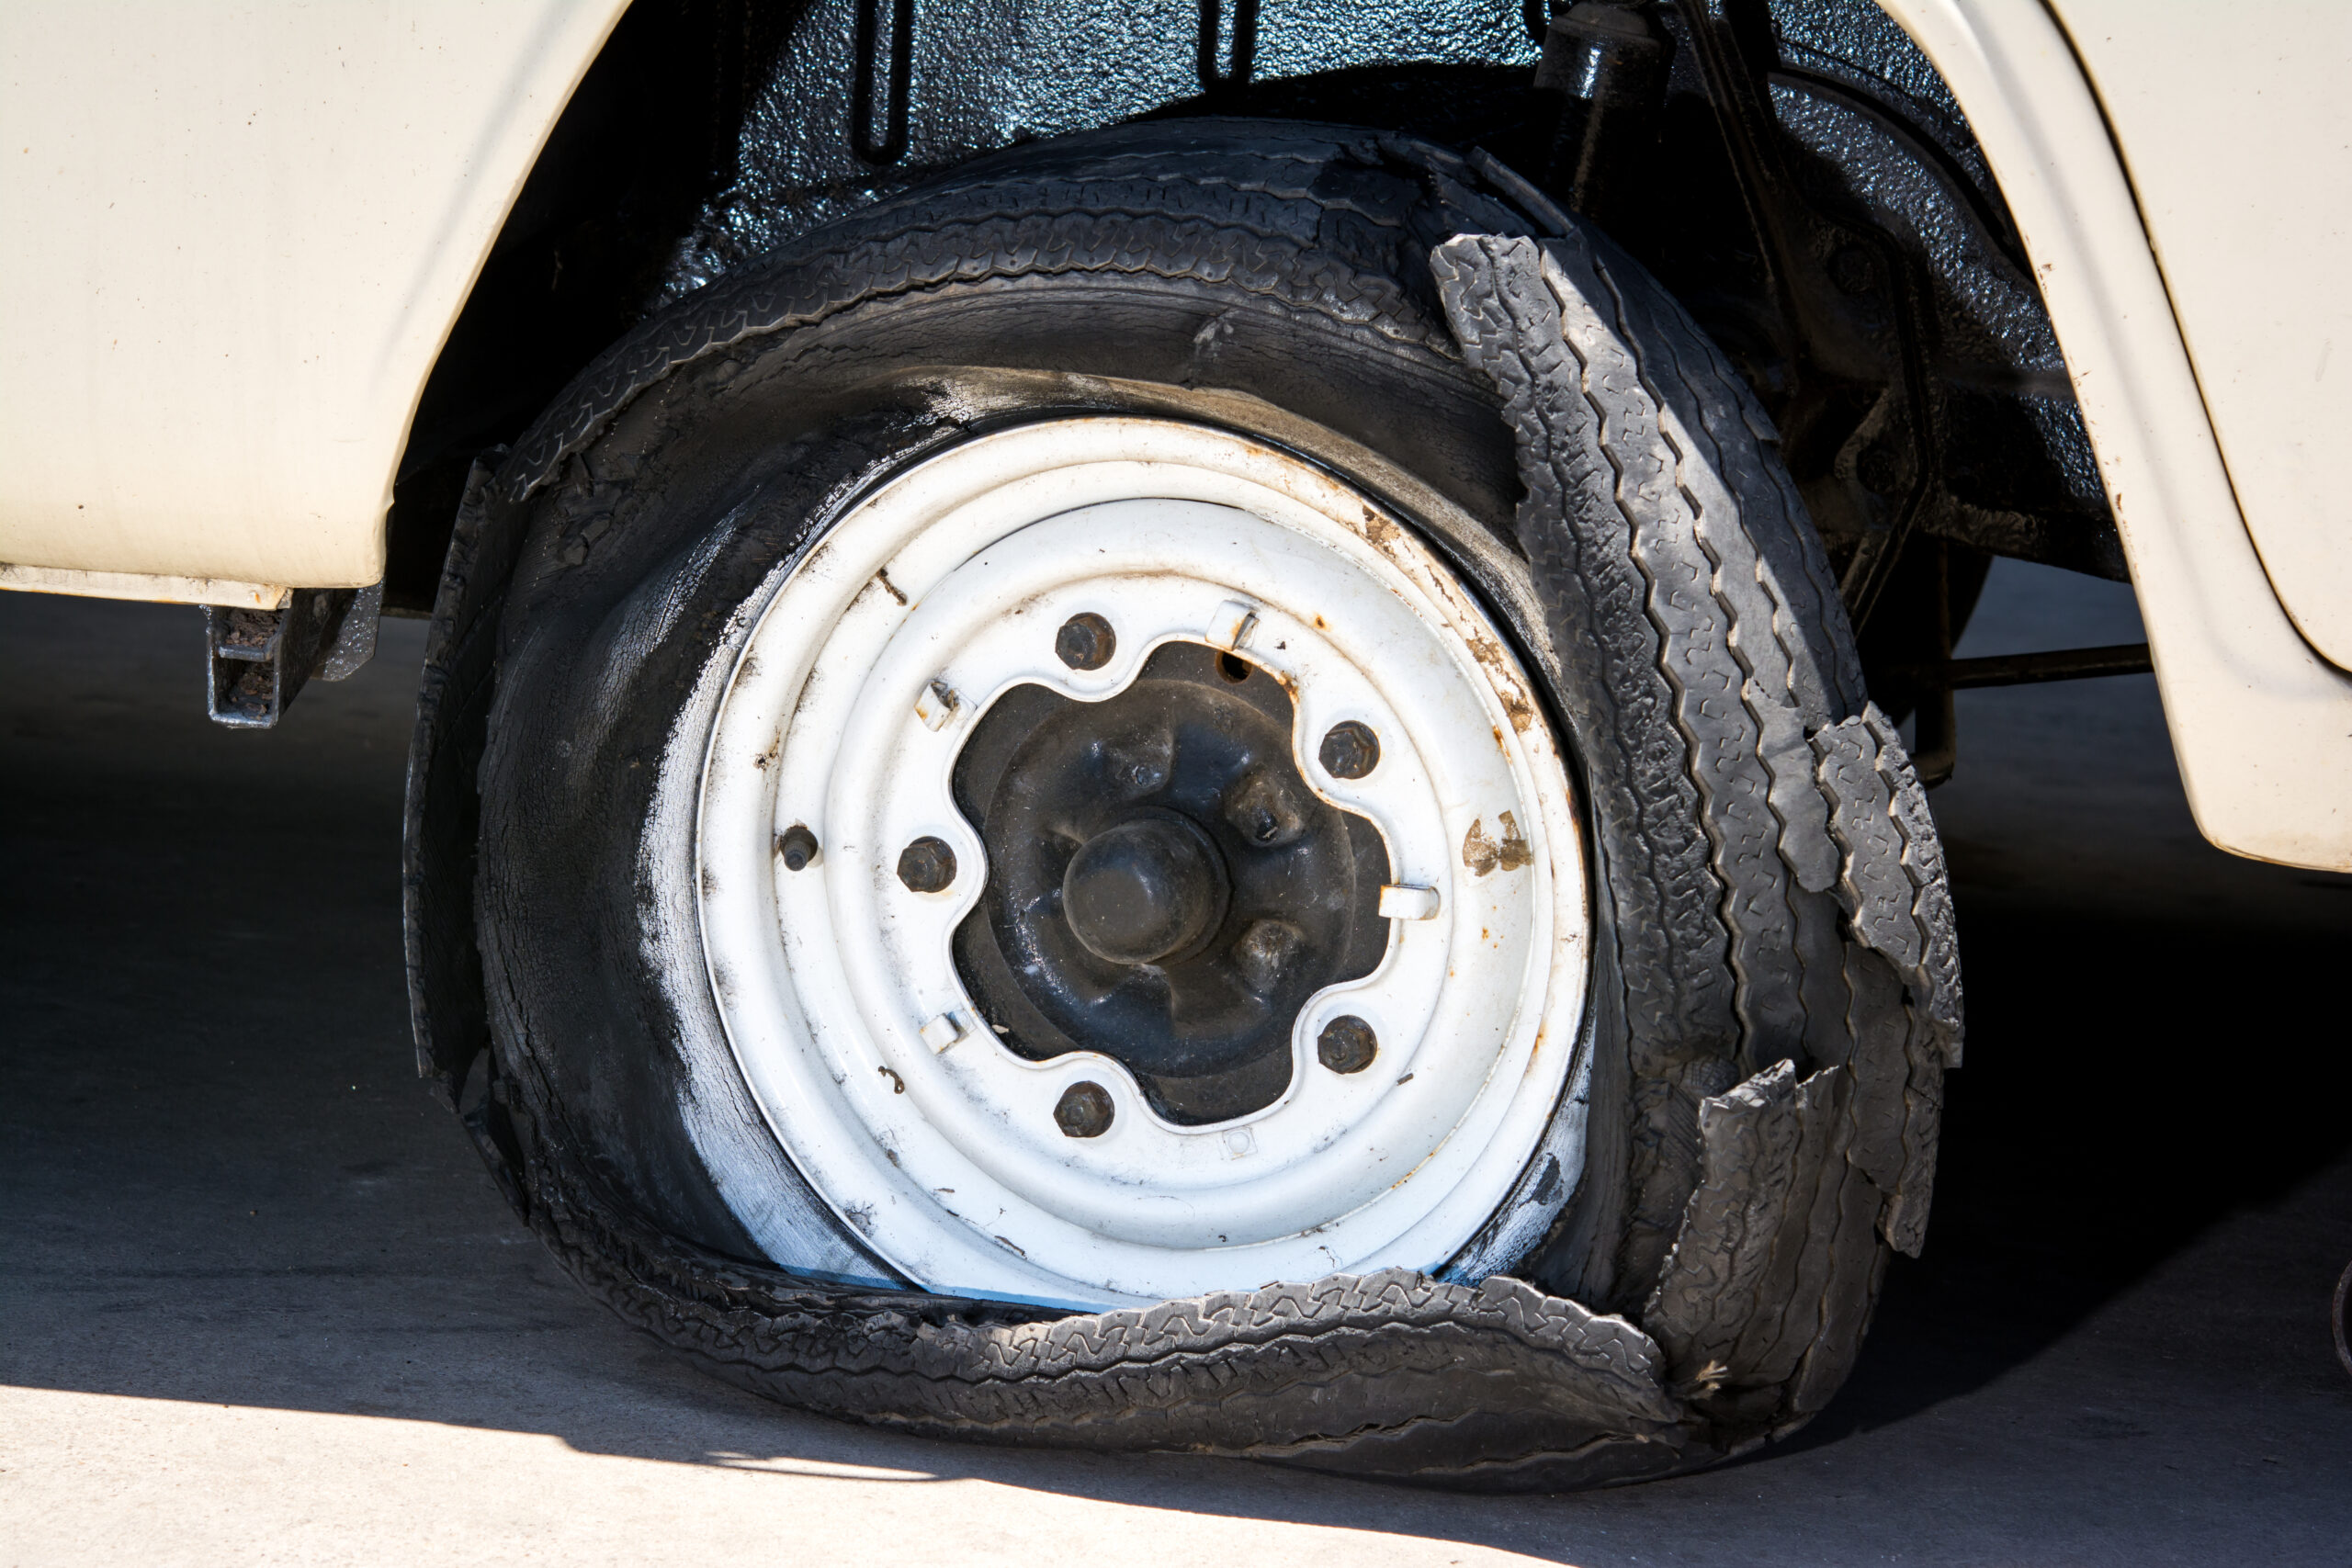 How Do You File a Claim After a Defective Tire Caused Your Car Accident